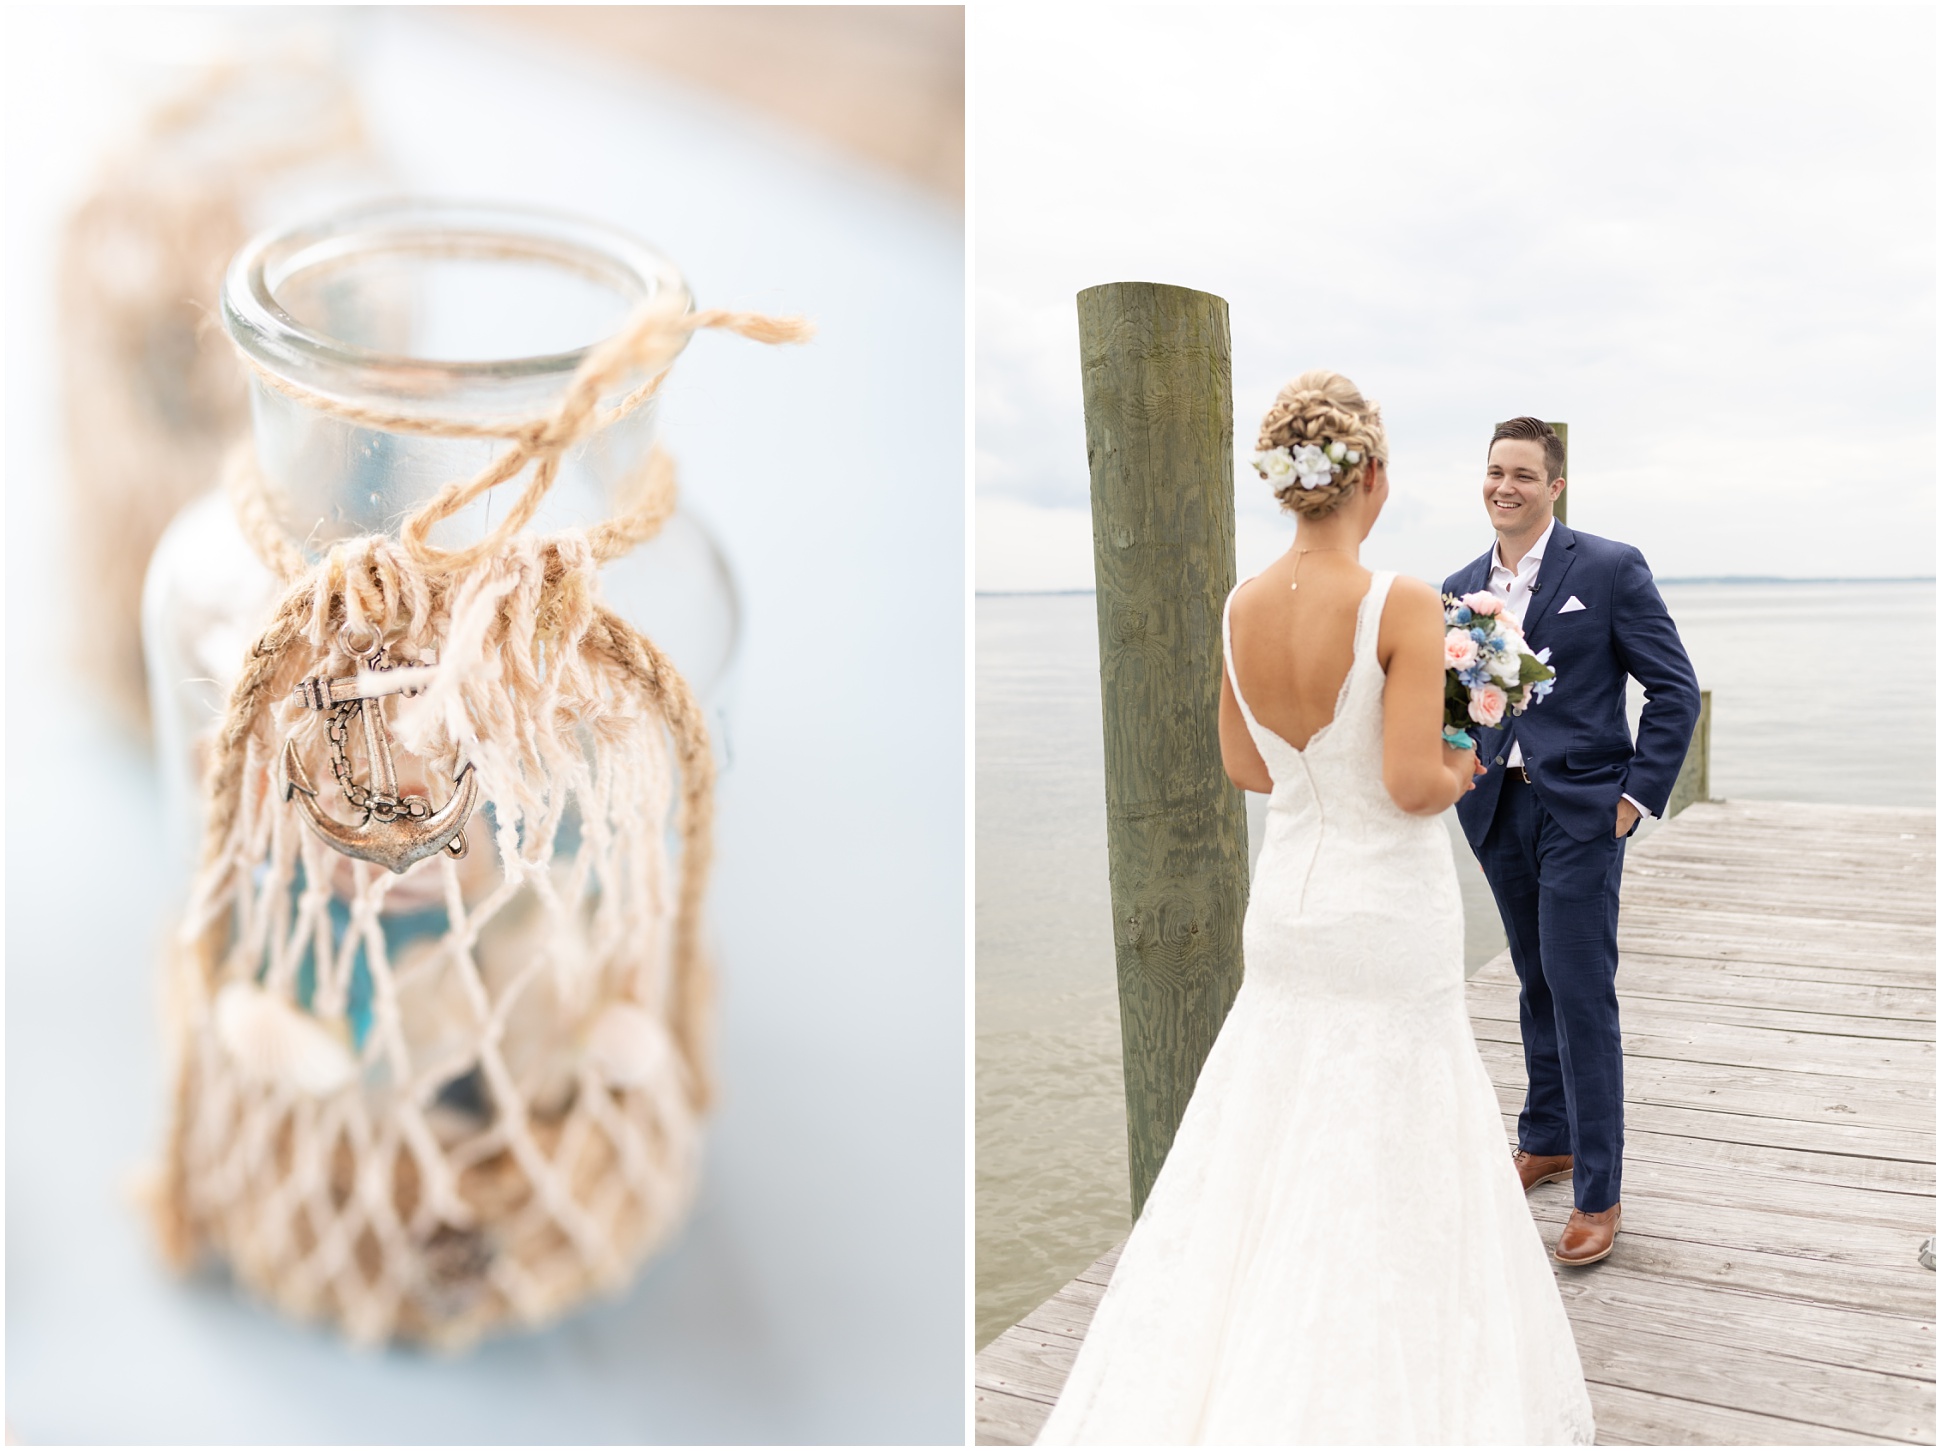 Left Image: Reception detail of seashell vase, Right Image: First Look on the dock